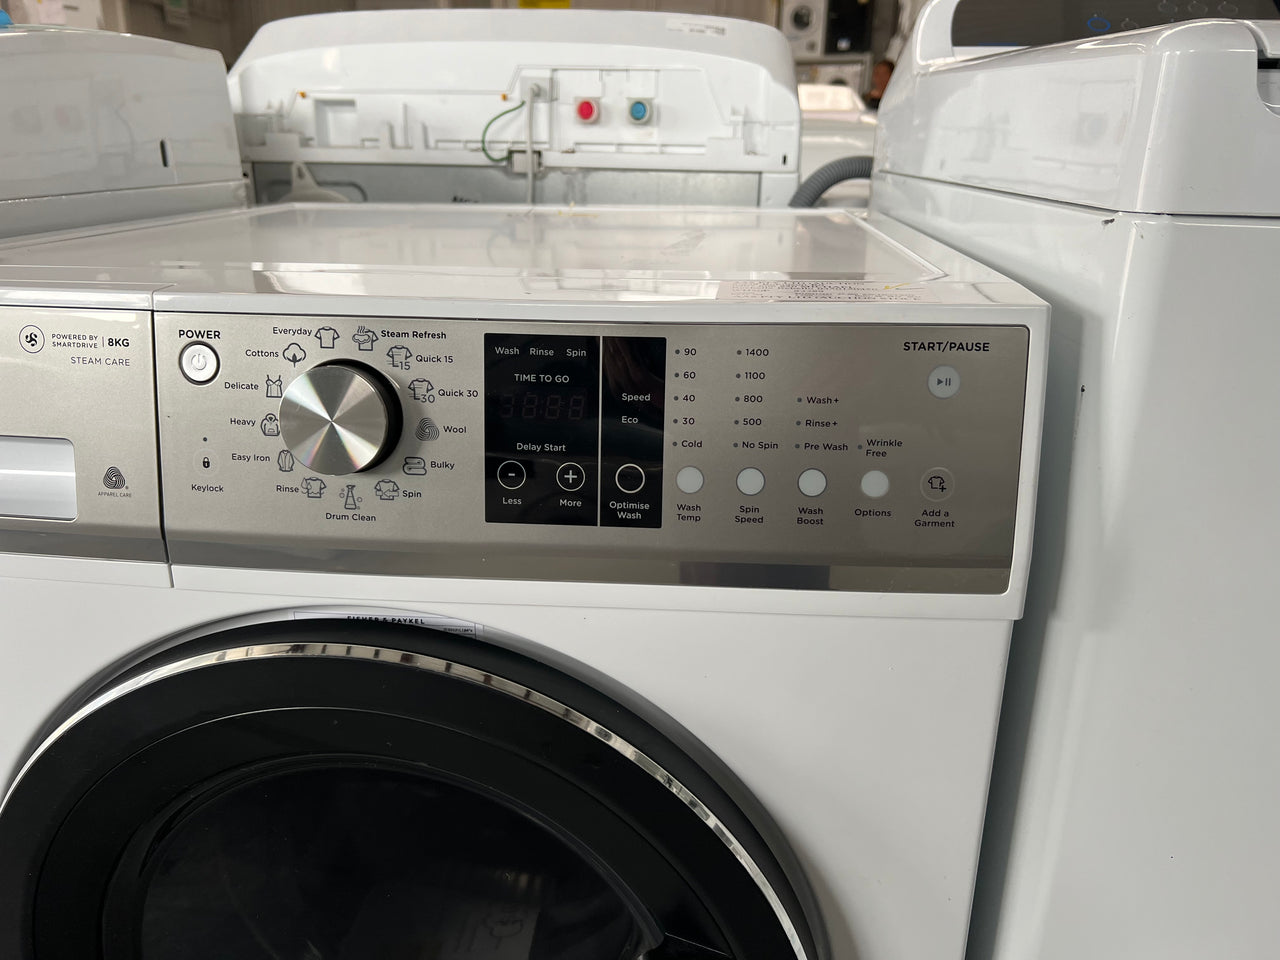 Factory second Fisher &amp; Paykel 8kg Series 5 Front Load Washing Machine with Steam Refresh Model: WH8060P3 - Second Hand Appliances Geebung